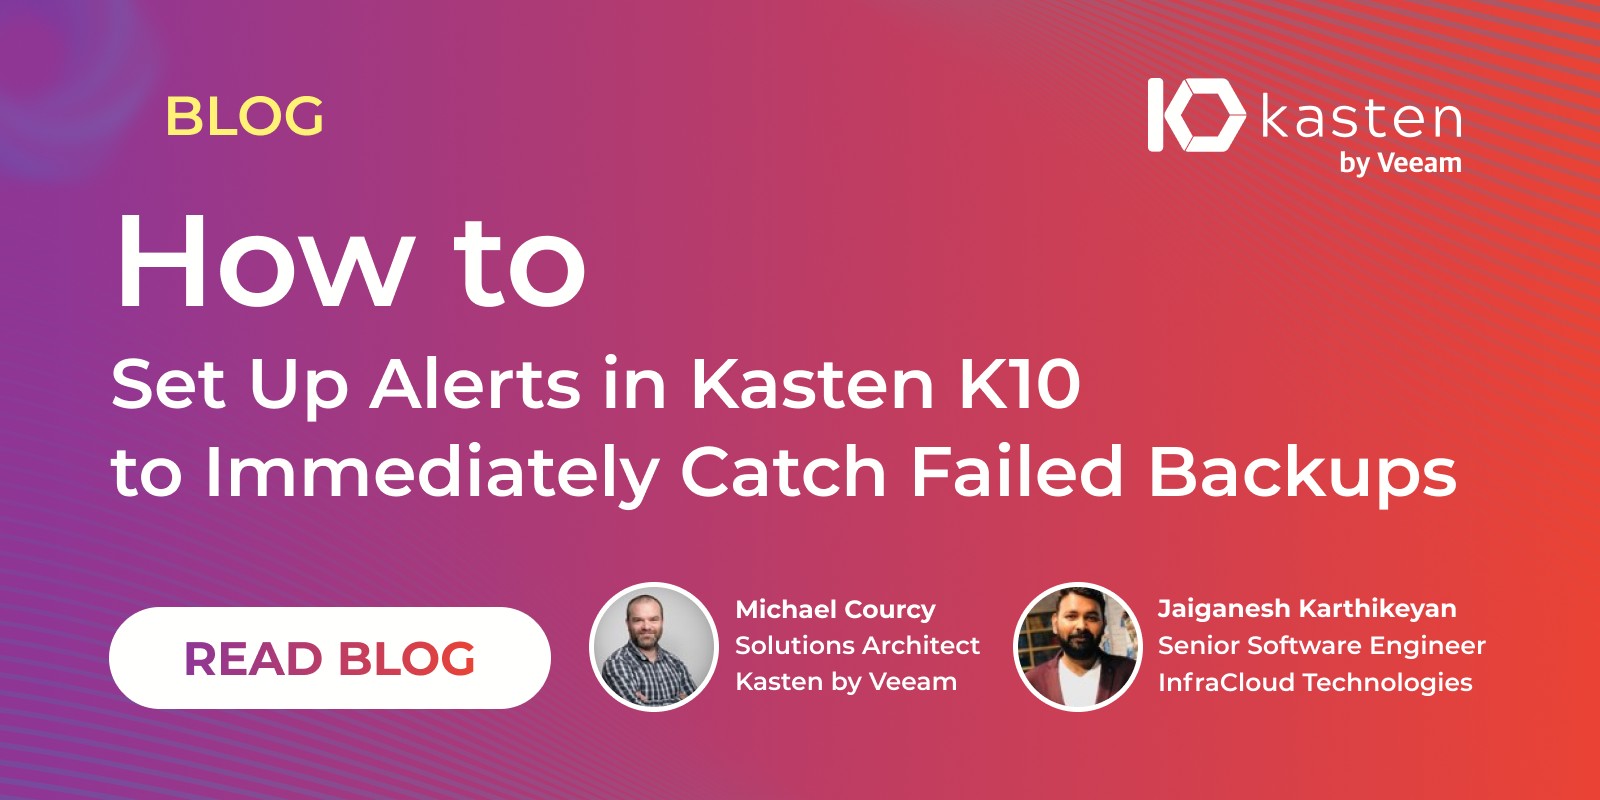 How to Set Up Alerts in Kasten K10 to Immediately Catch Failed Backups